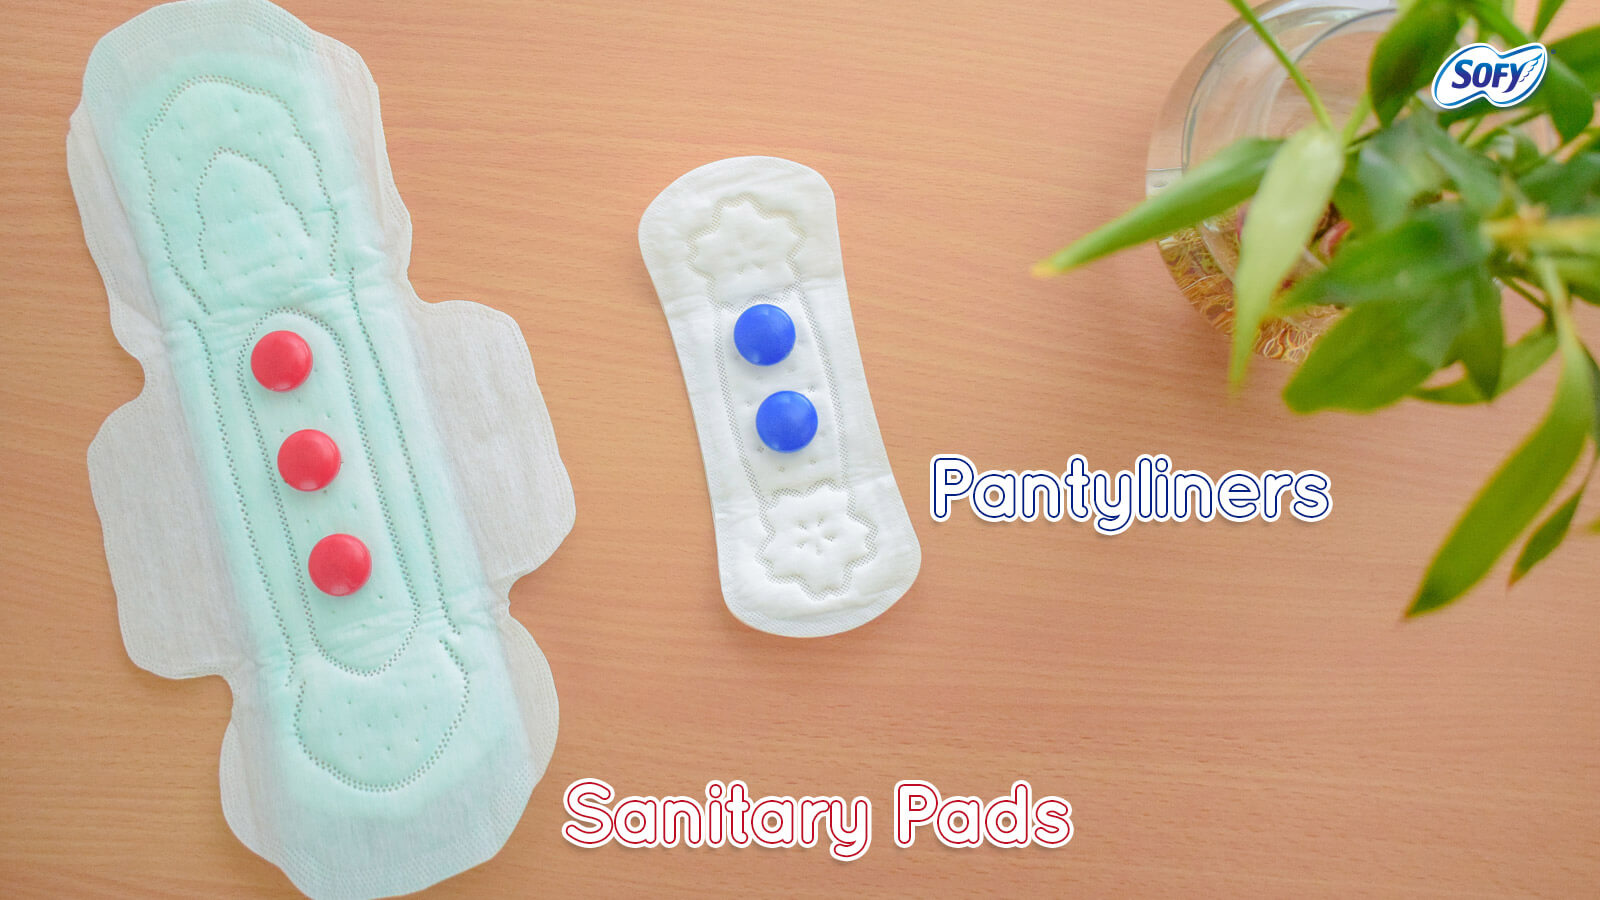 Whats the difference between Sanitary Pads and Pantyliners